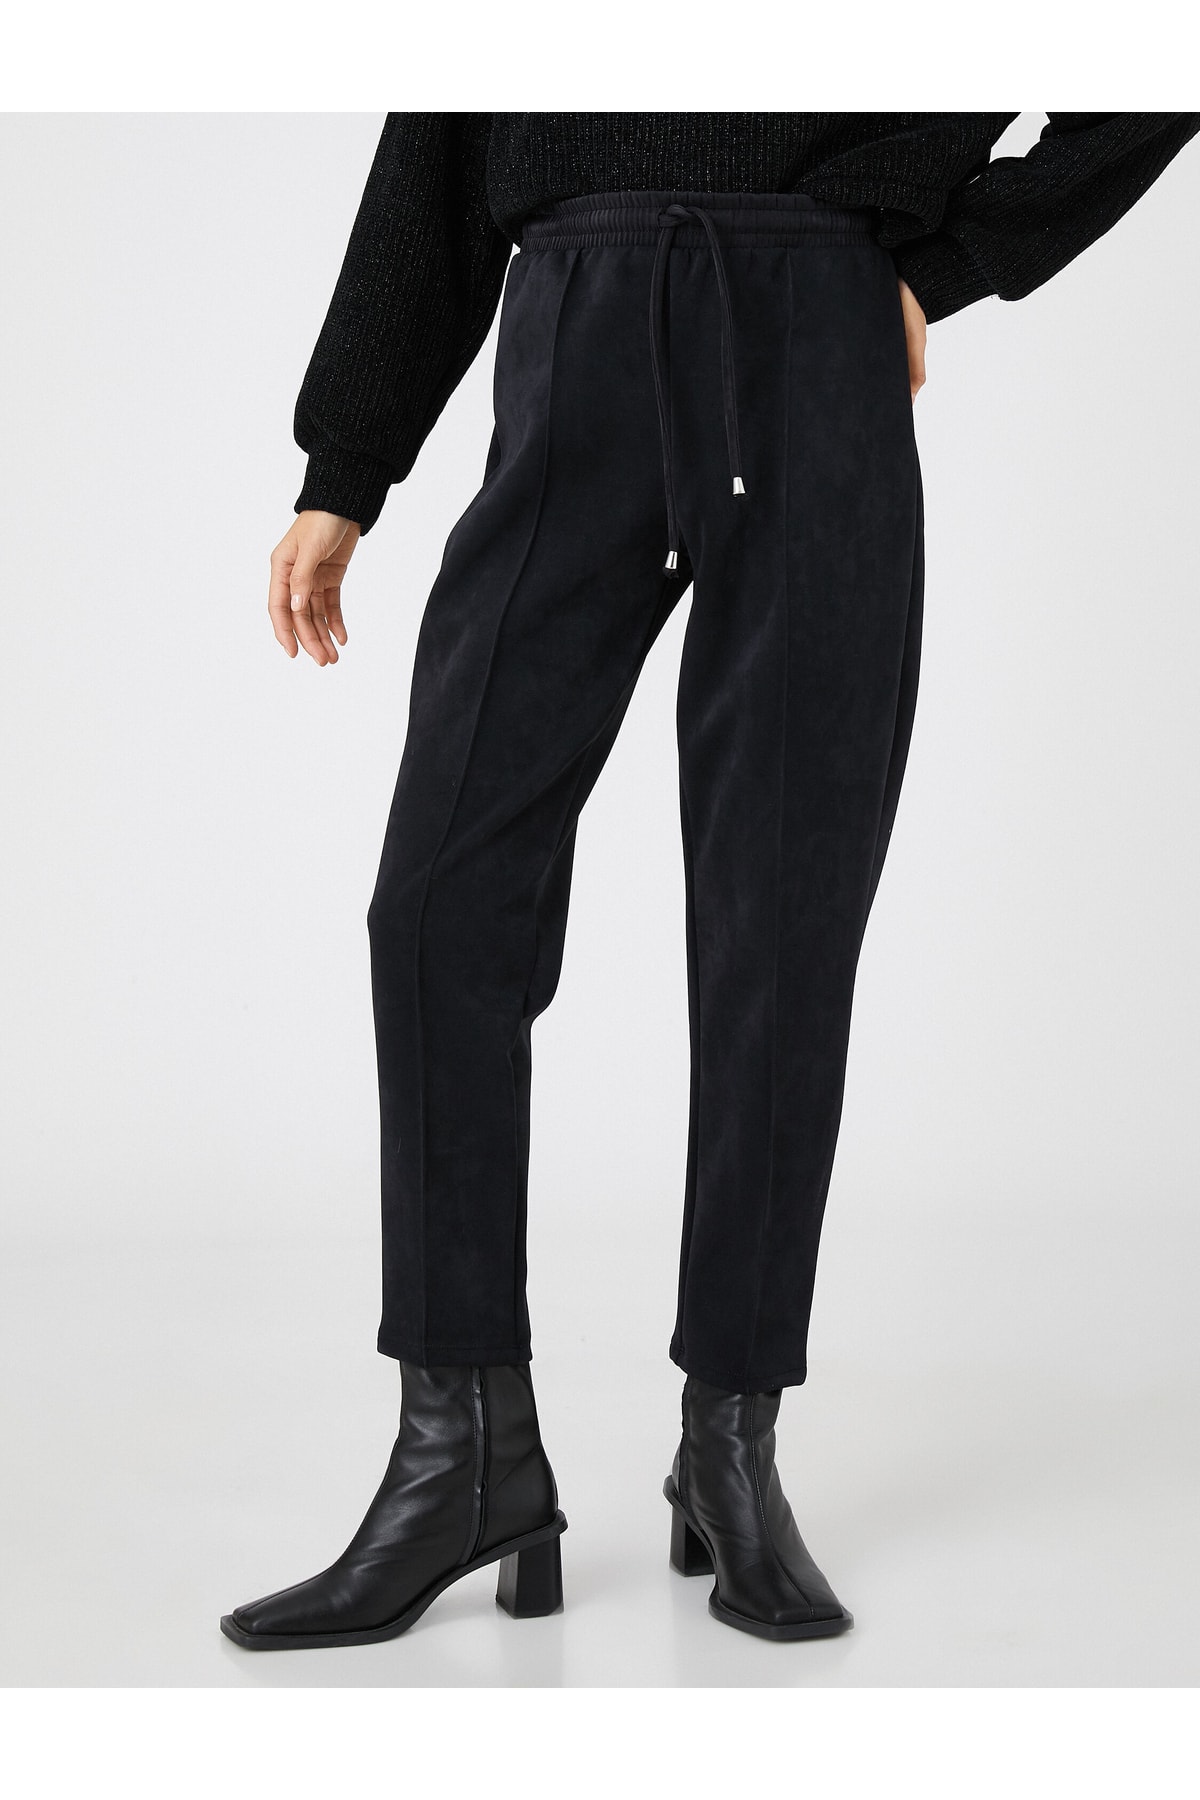 KOTON Ribbed Trousers Relaxed Slim Leg